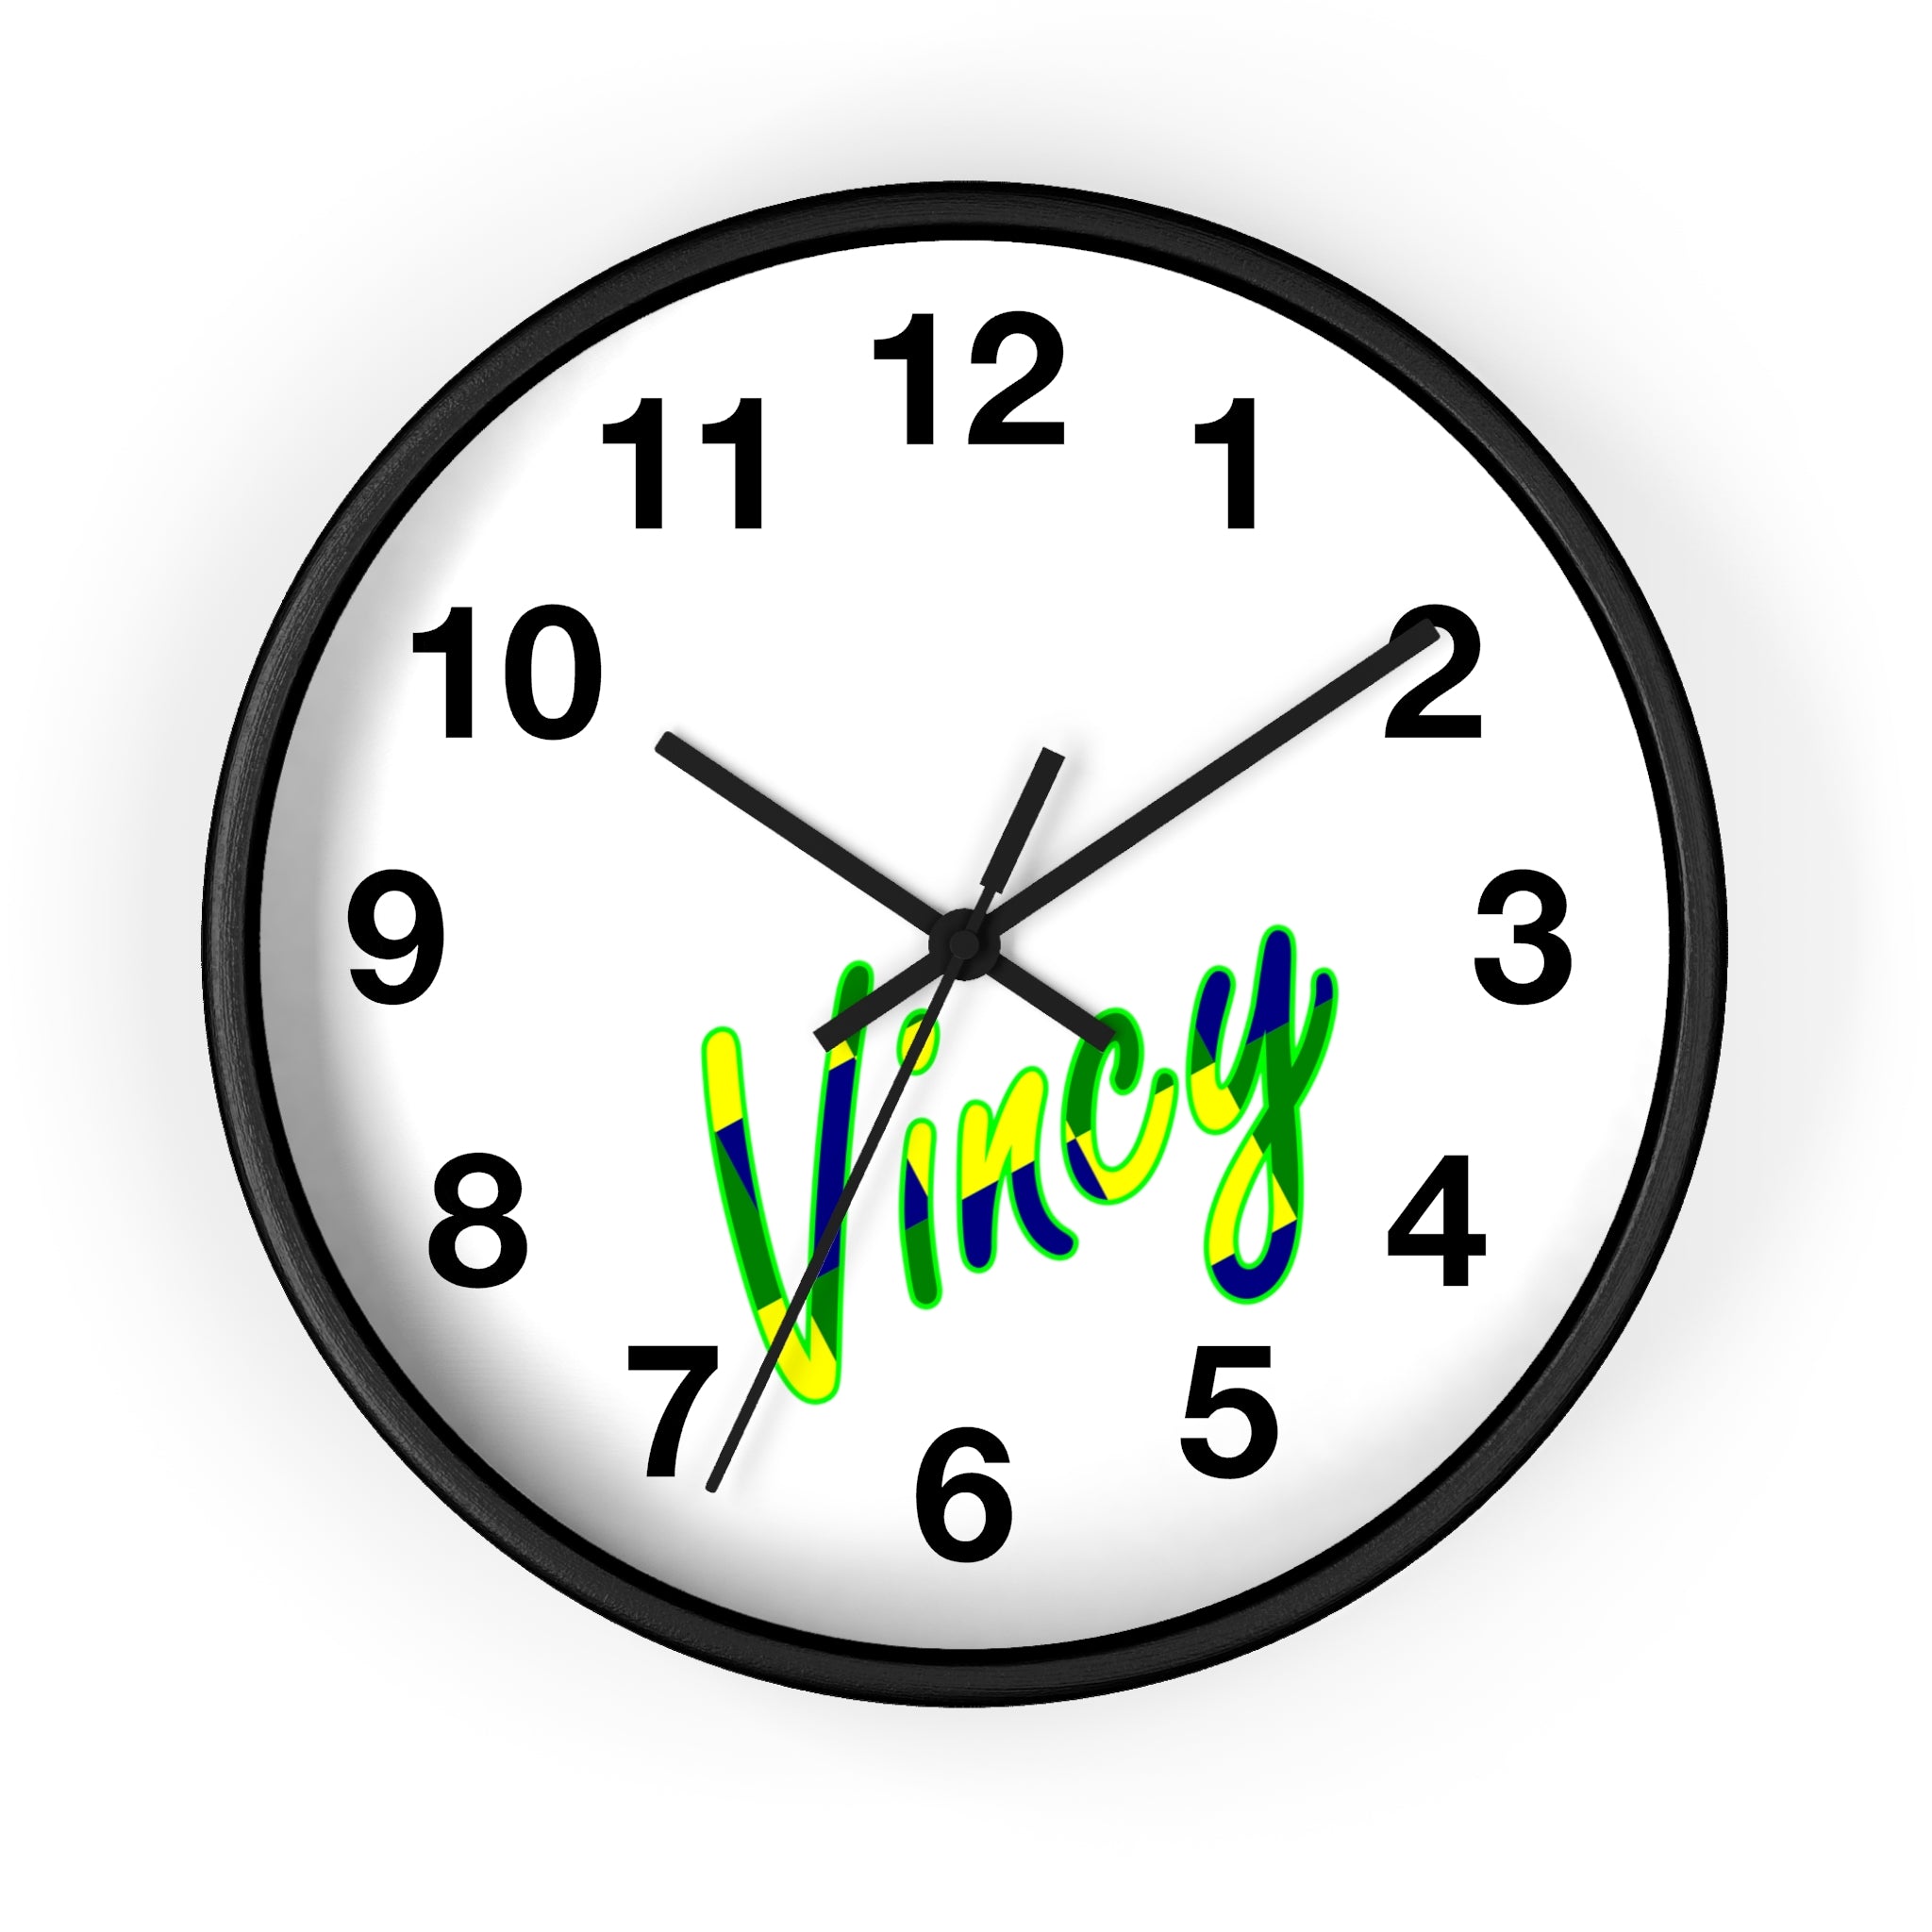 10 inch round wall clock with Vincy written across the face in blue, yellow and green